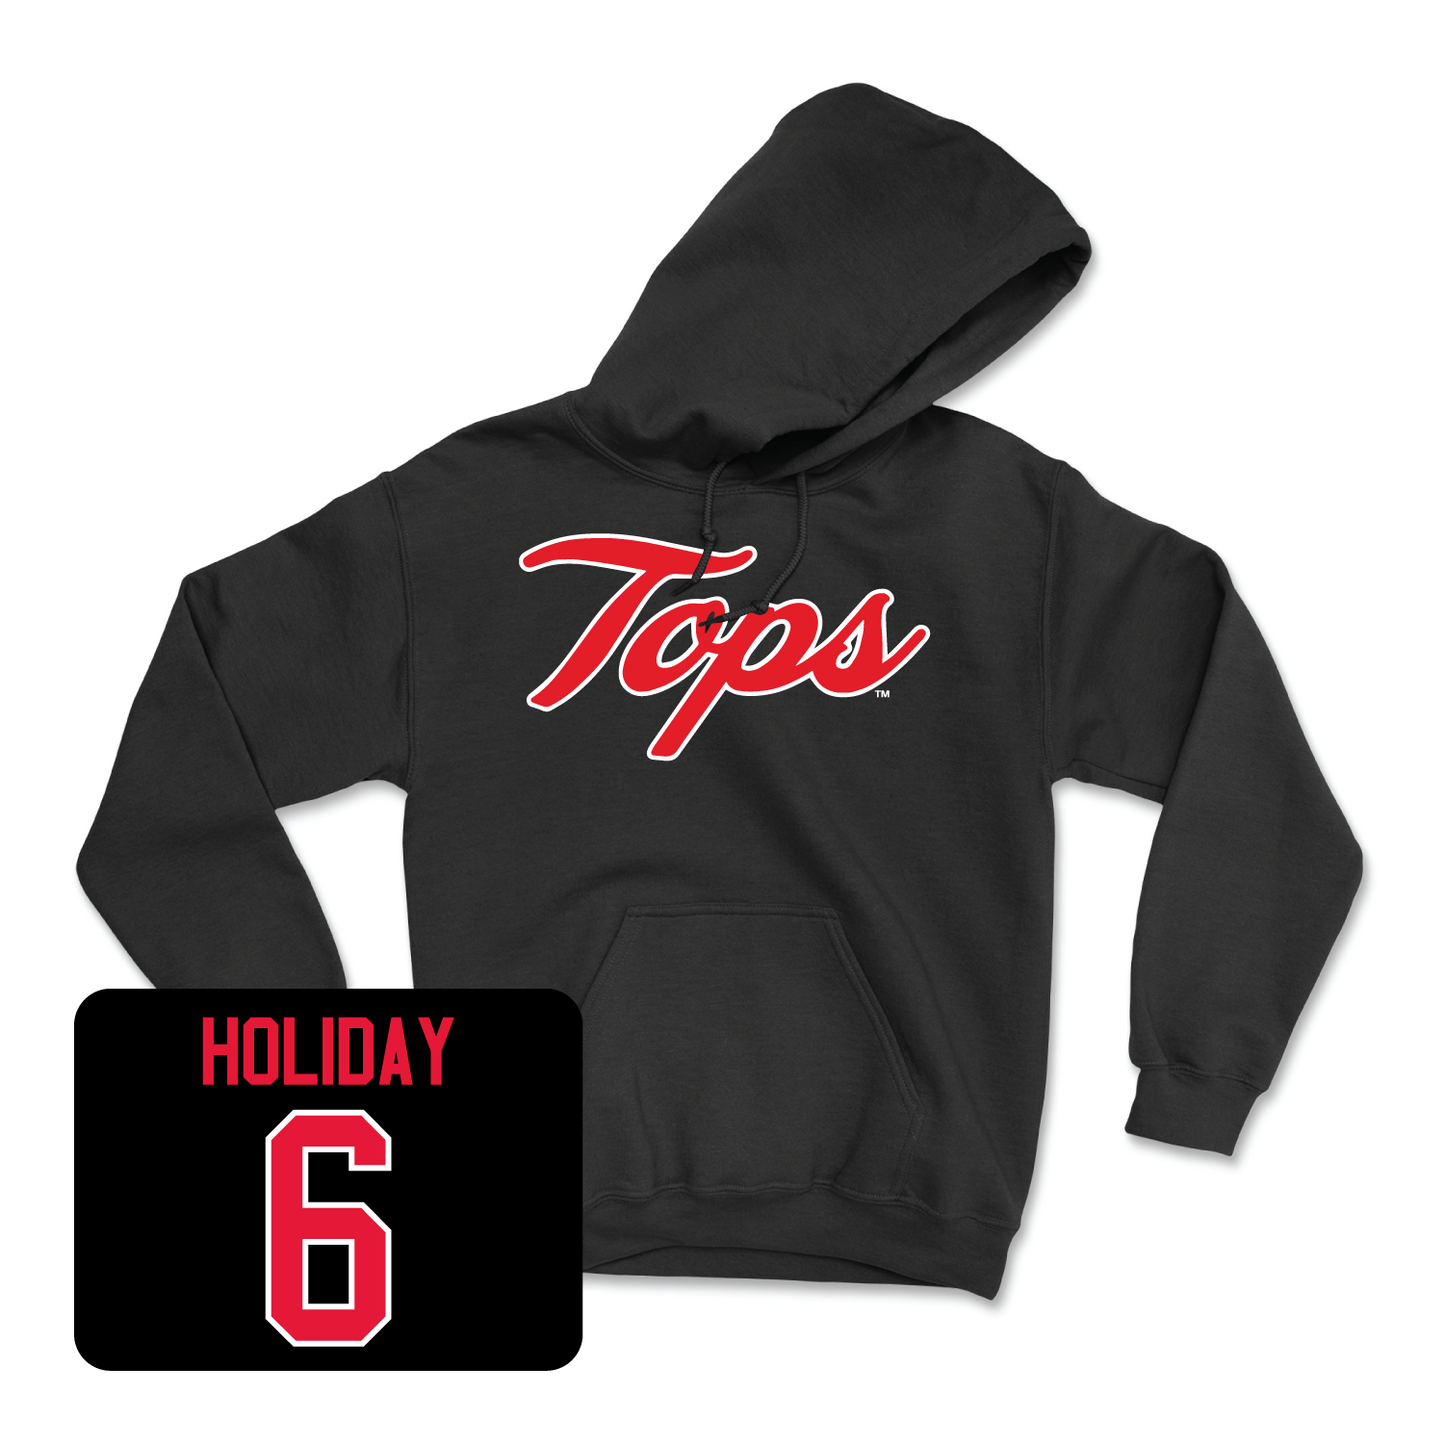 Black Football Tops Hoodie 3 Youth Small / Jimmy Holiday | #6